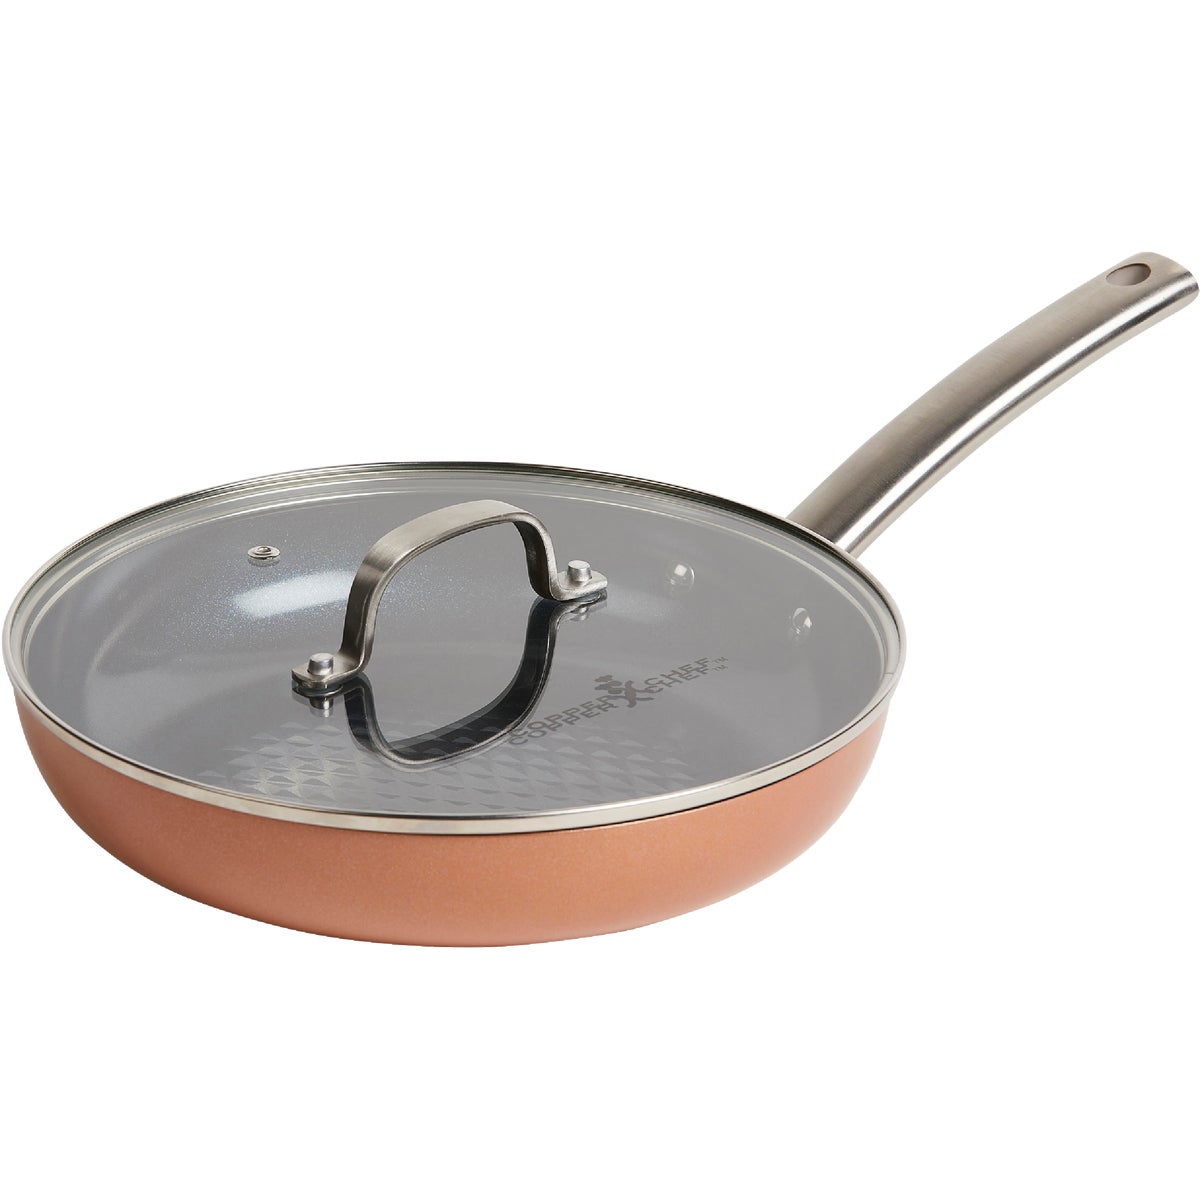 Copper Chef Black Diamond 12 In. Round Fry Pan with Glass Lid